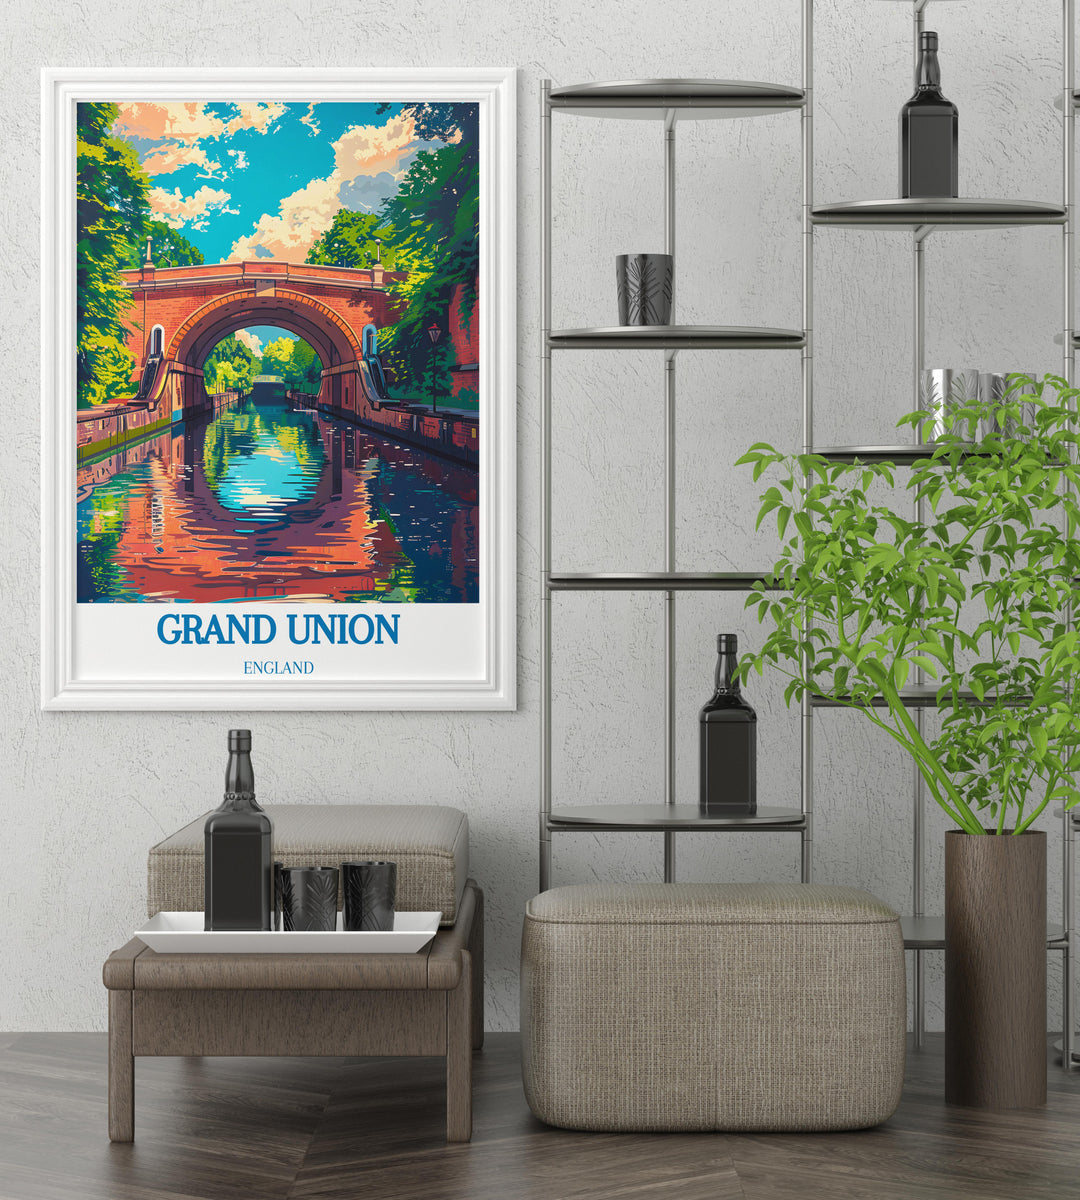 Vintage style narrowboat poster capturing the leisurely lifestyle on the Grand Union Canal, an excellent gift for those who love unique travel prints.